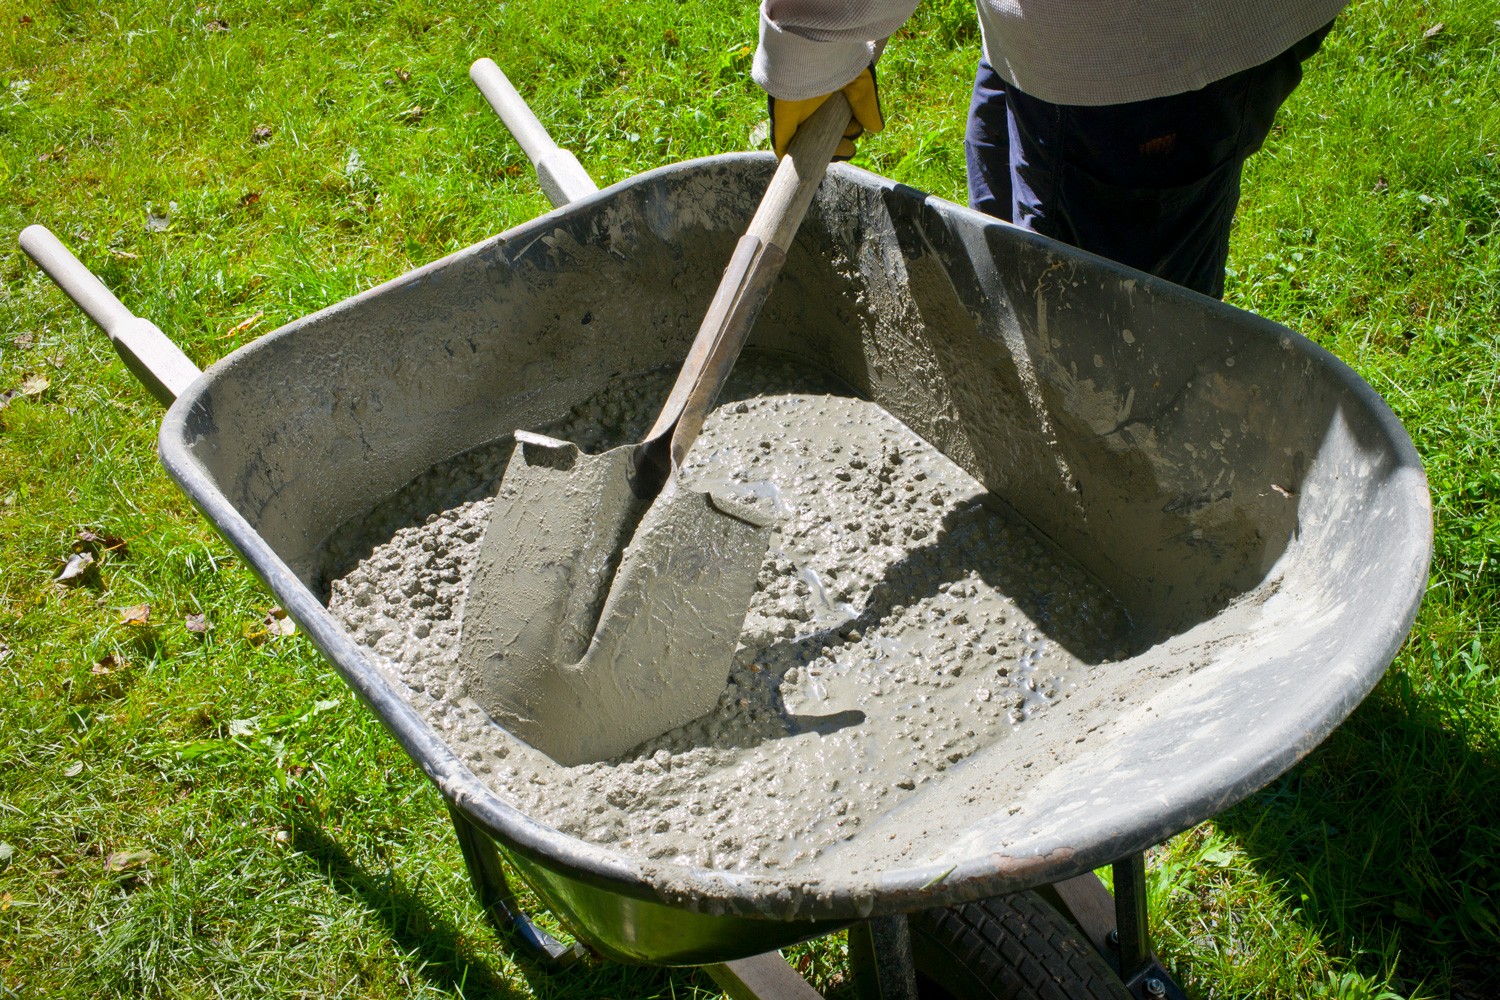 A woman uses a shovel to mix cement by hand in a wheelbarrow on a bright, sunny morning.